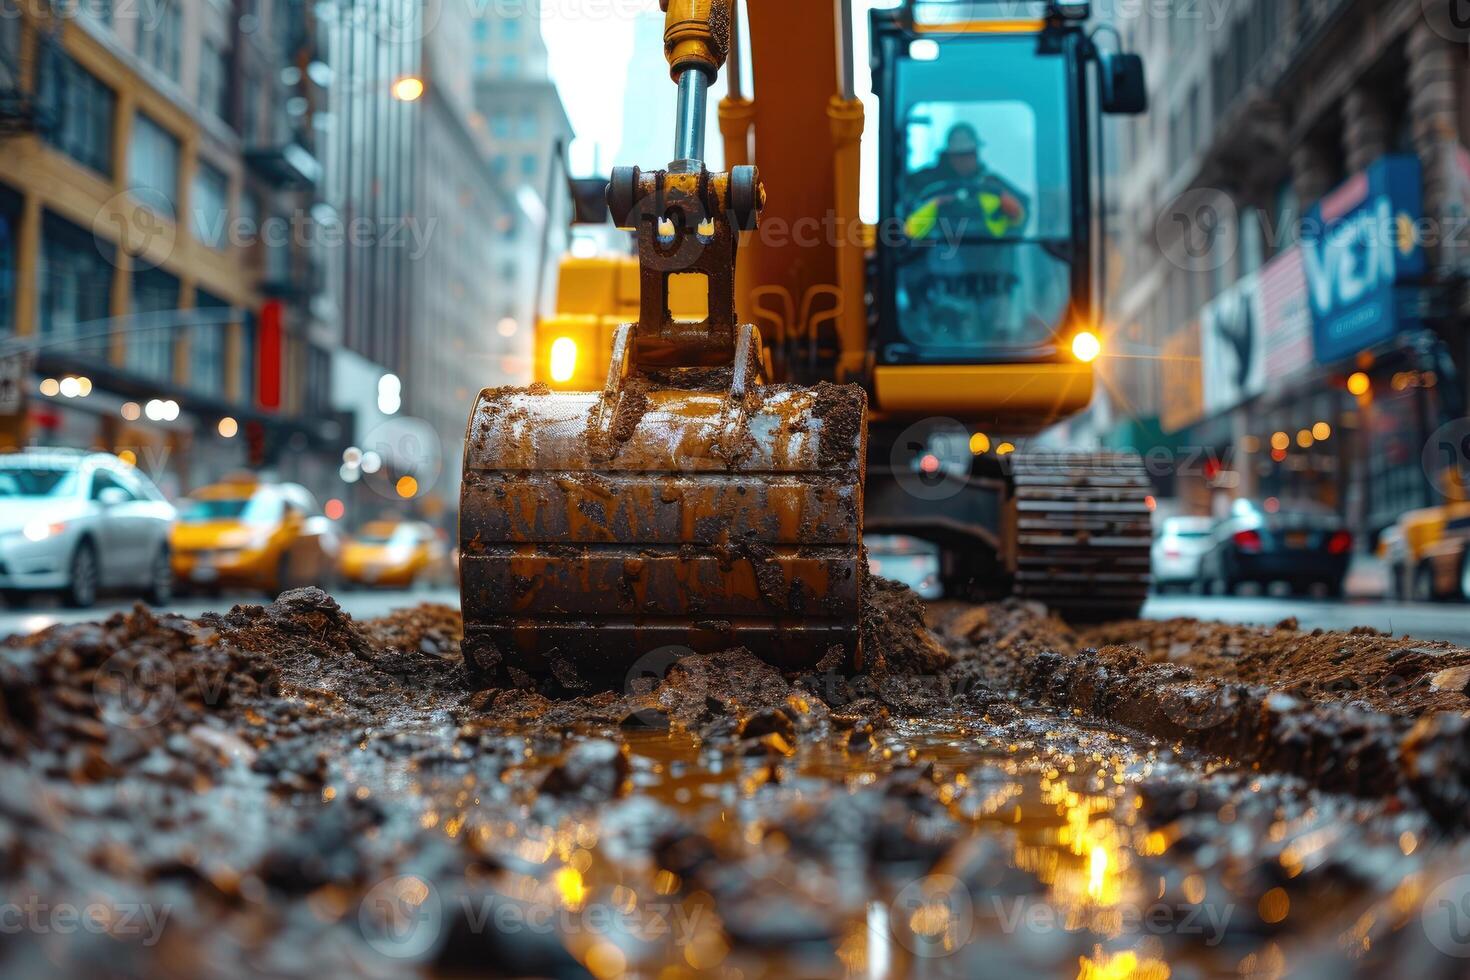 AI generated An excavator digging dirt on a construction professional photography photo